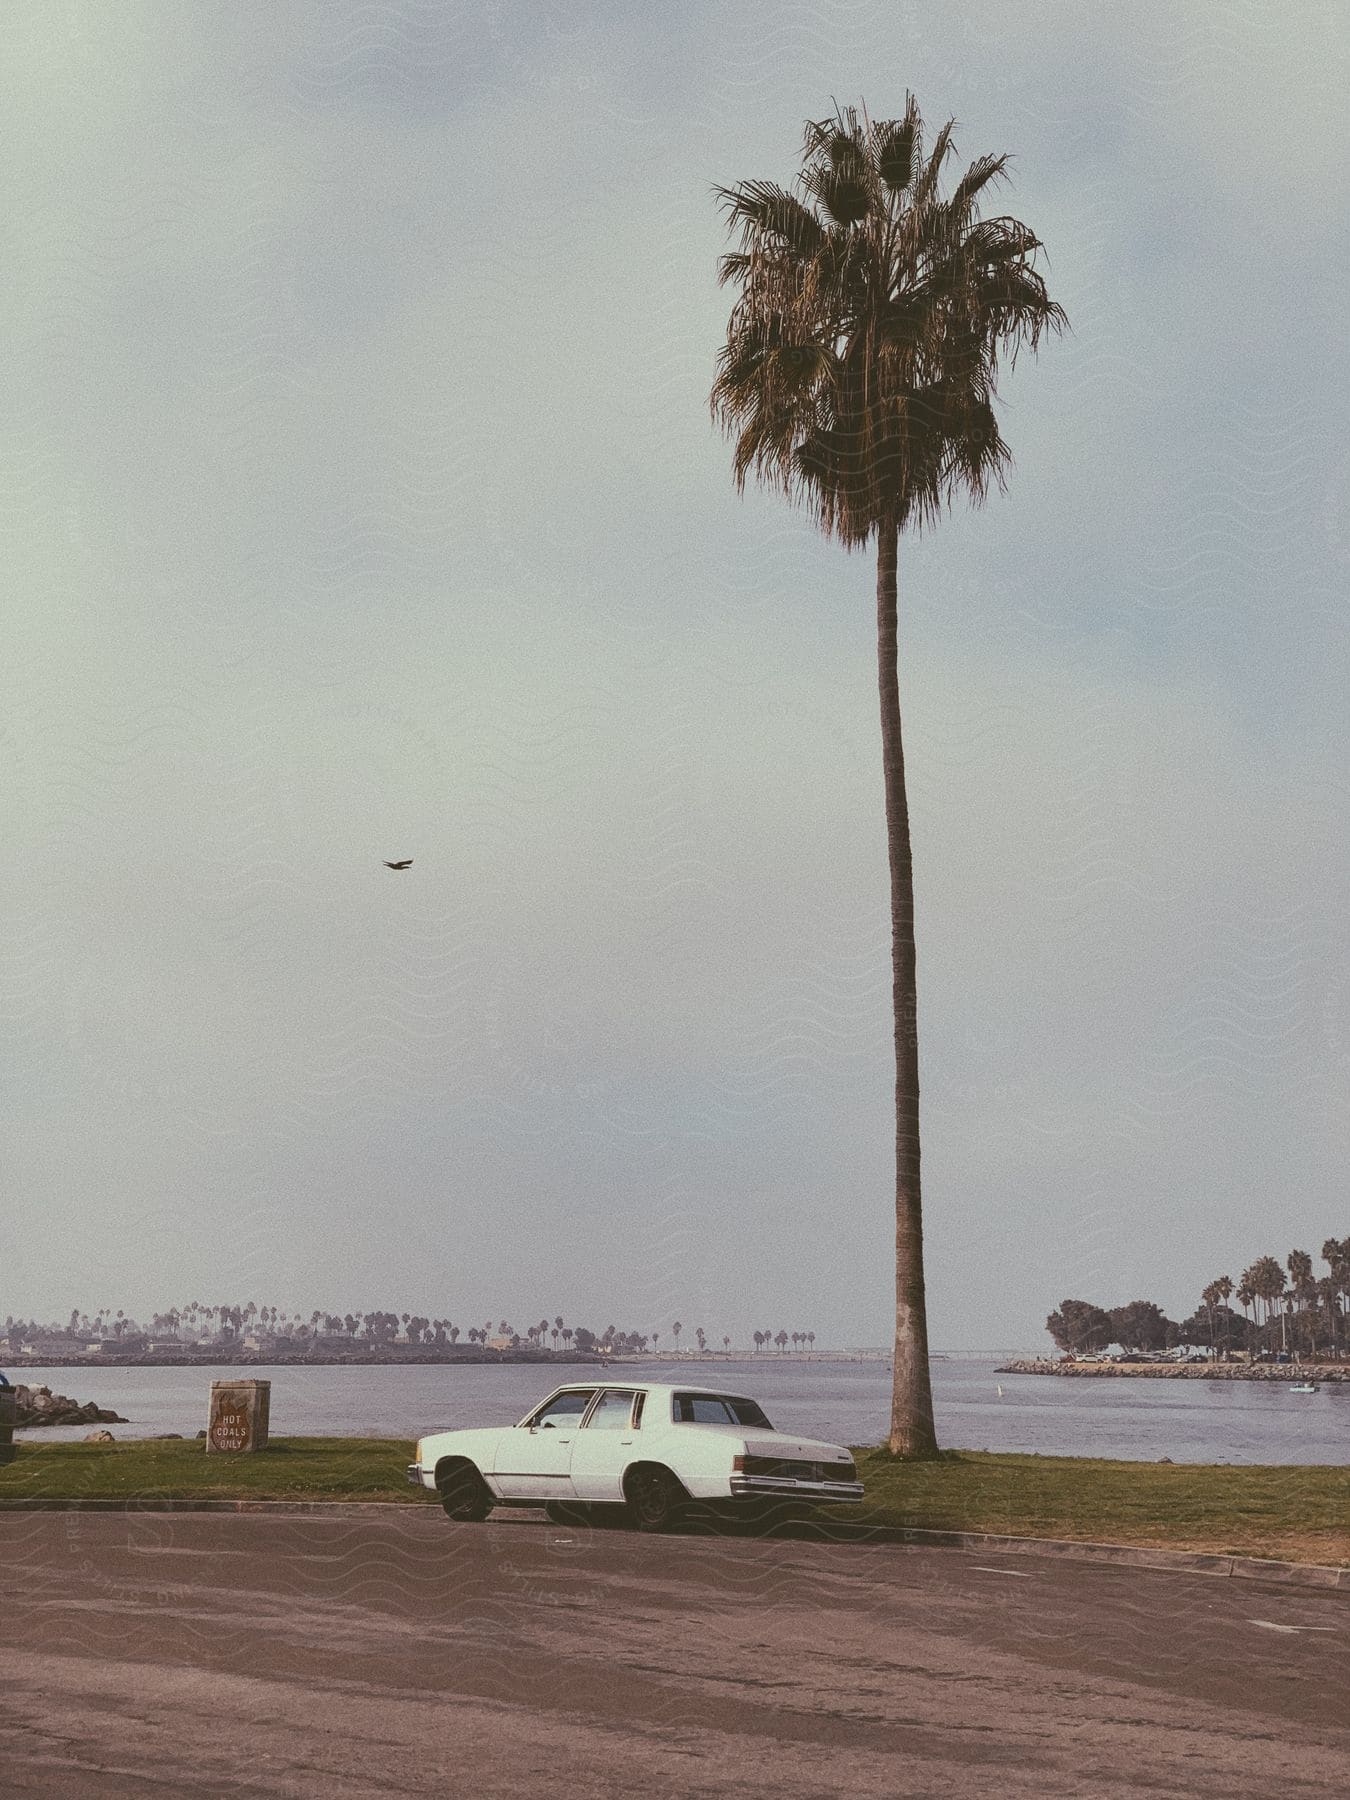 A white car parked under a palm tree beside a lake with a bird flying overhead